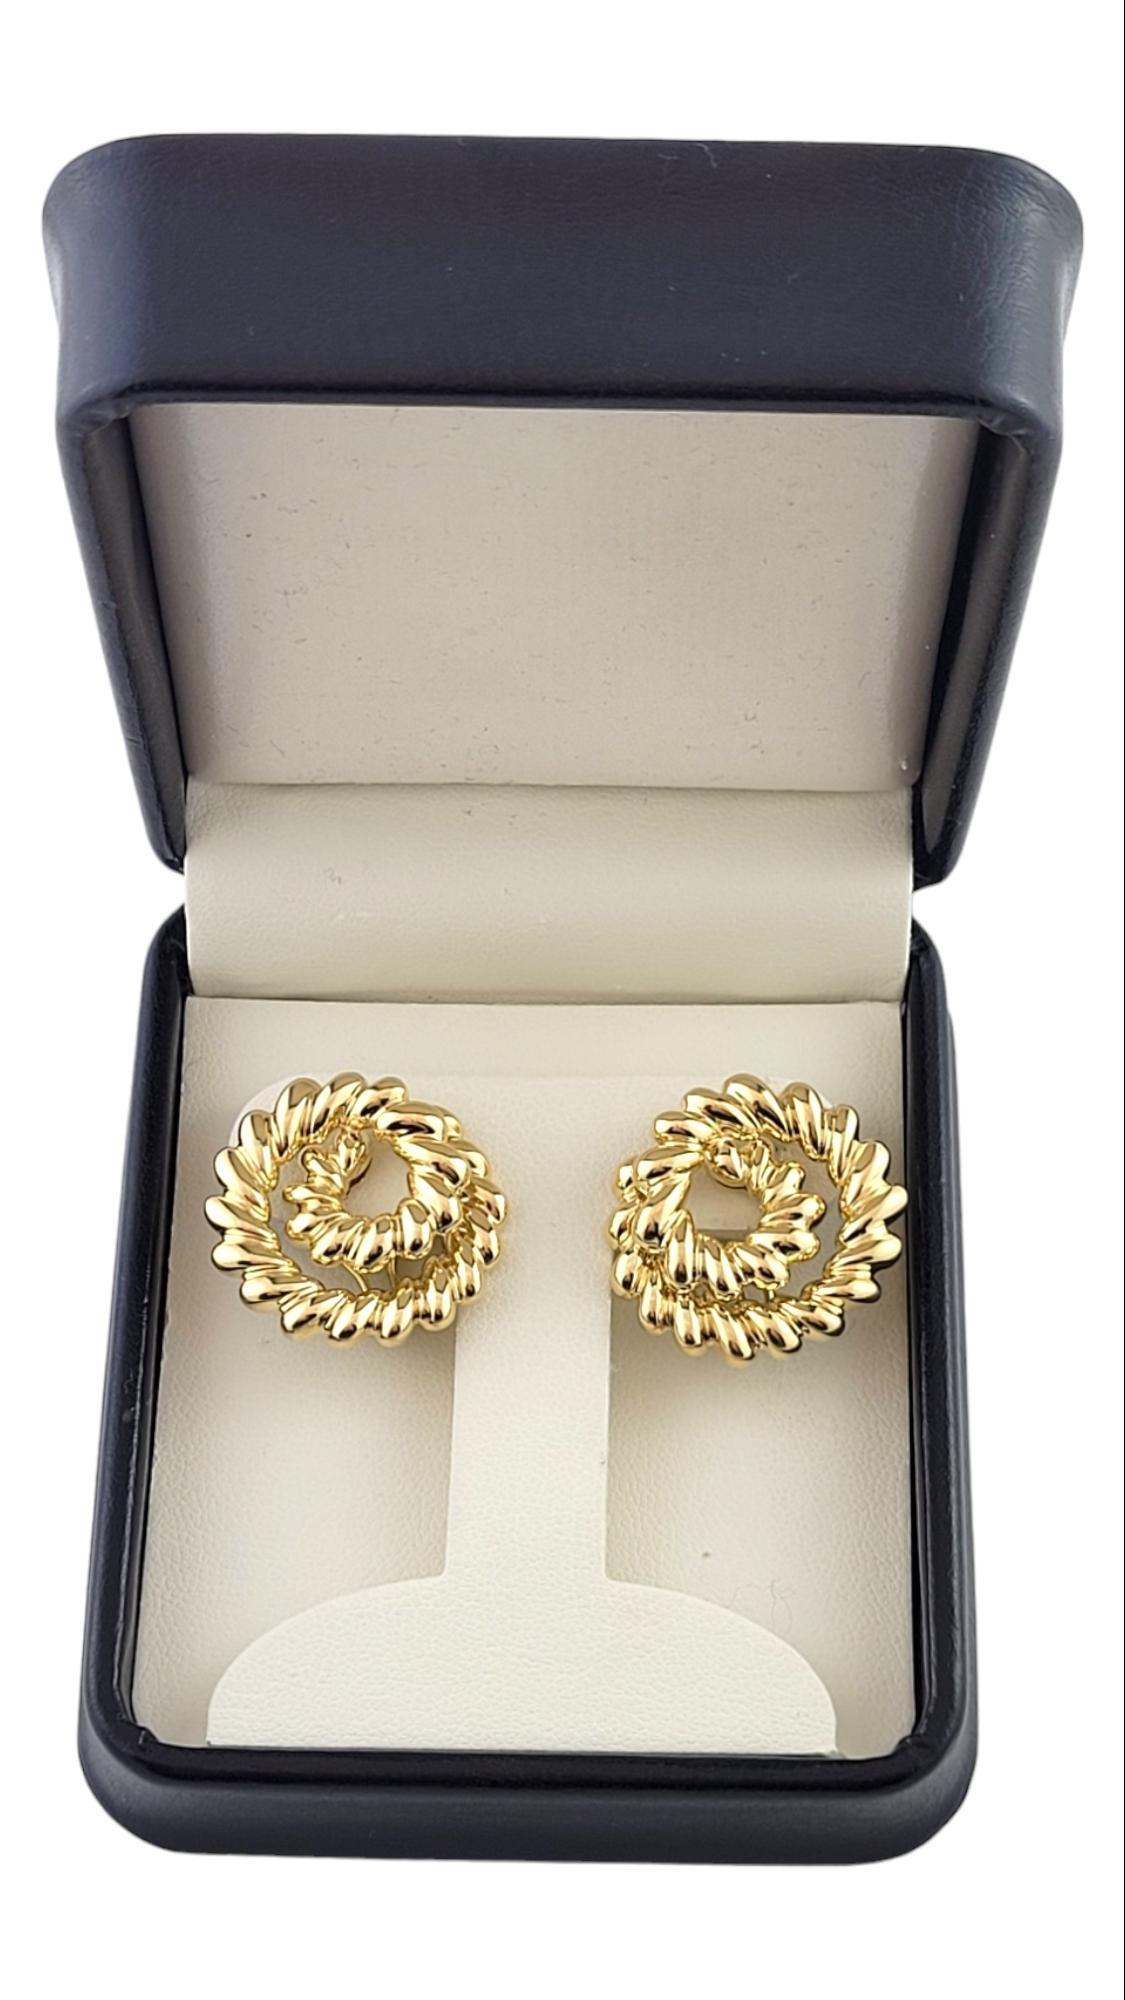 Tiffany & Co. 18K Yellow Gold Coiled Rope Clip on Earrings #15836 For Sale 2